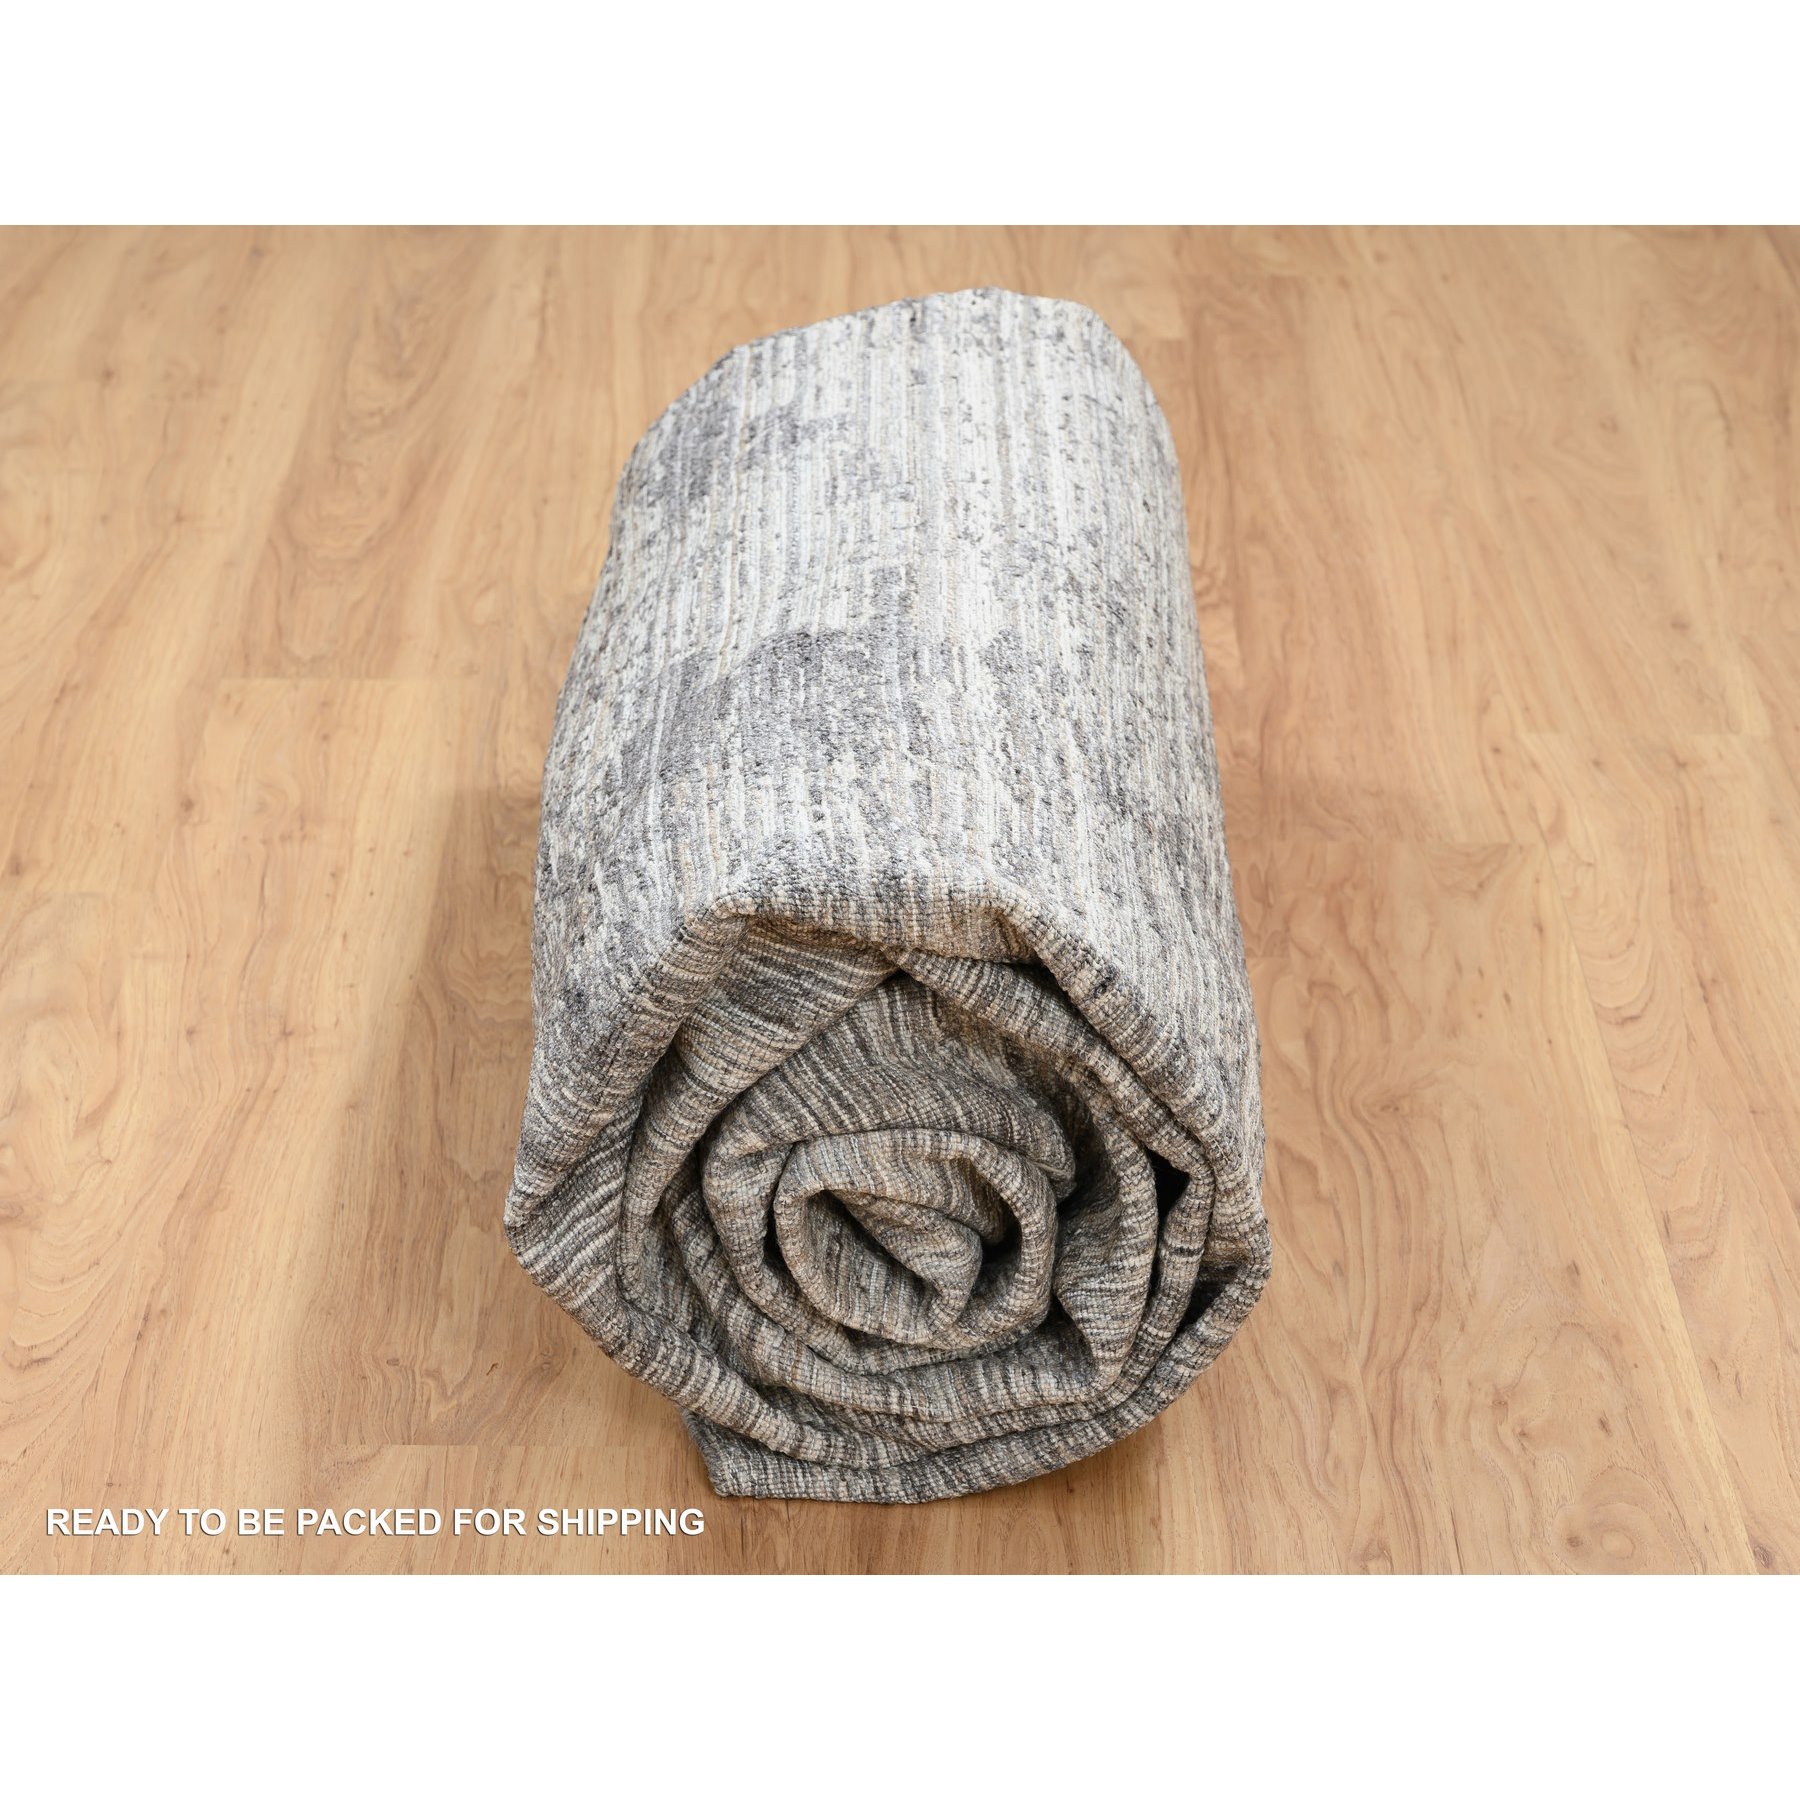 9'1"x12' Gray Natural Wool, Variegated Texture Modern Abstract Design, Hand Loomed Oriental Rug 